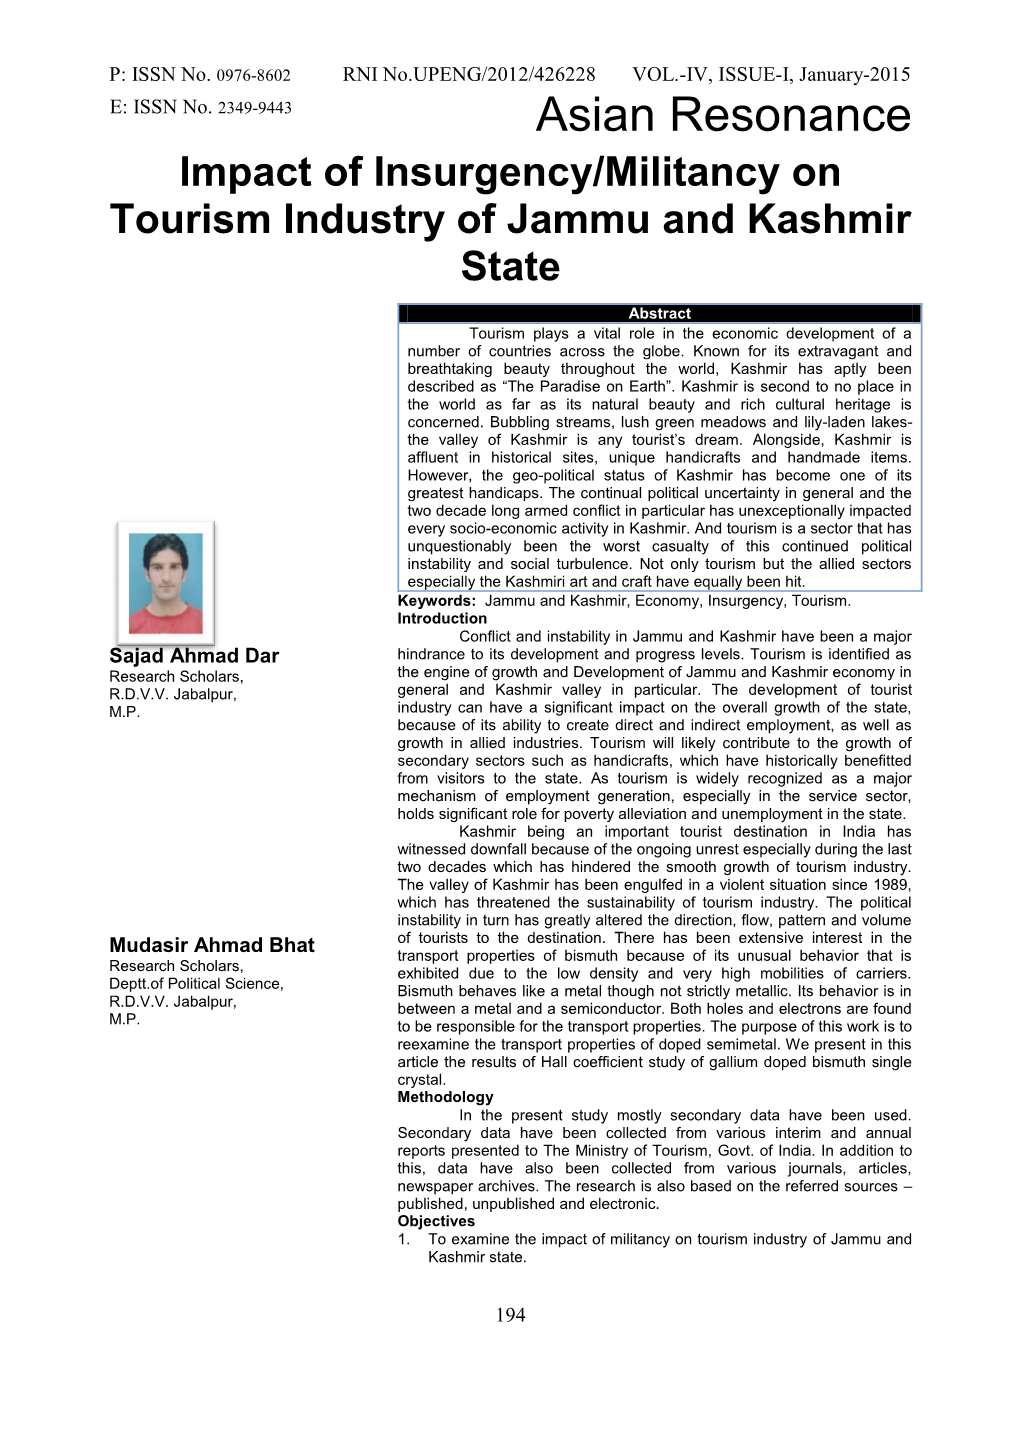 Impact of Insurgency/Militancy on Tourism Industry of Jammu and Kashmir State